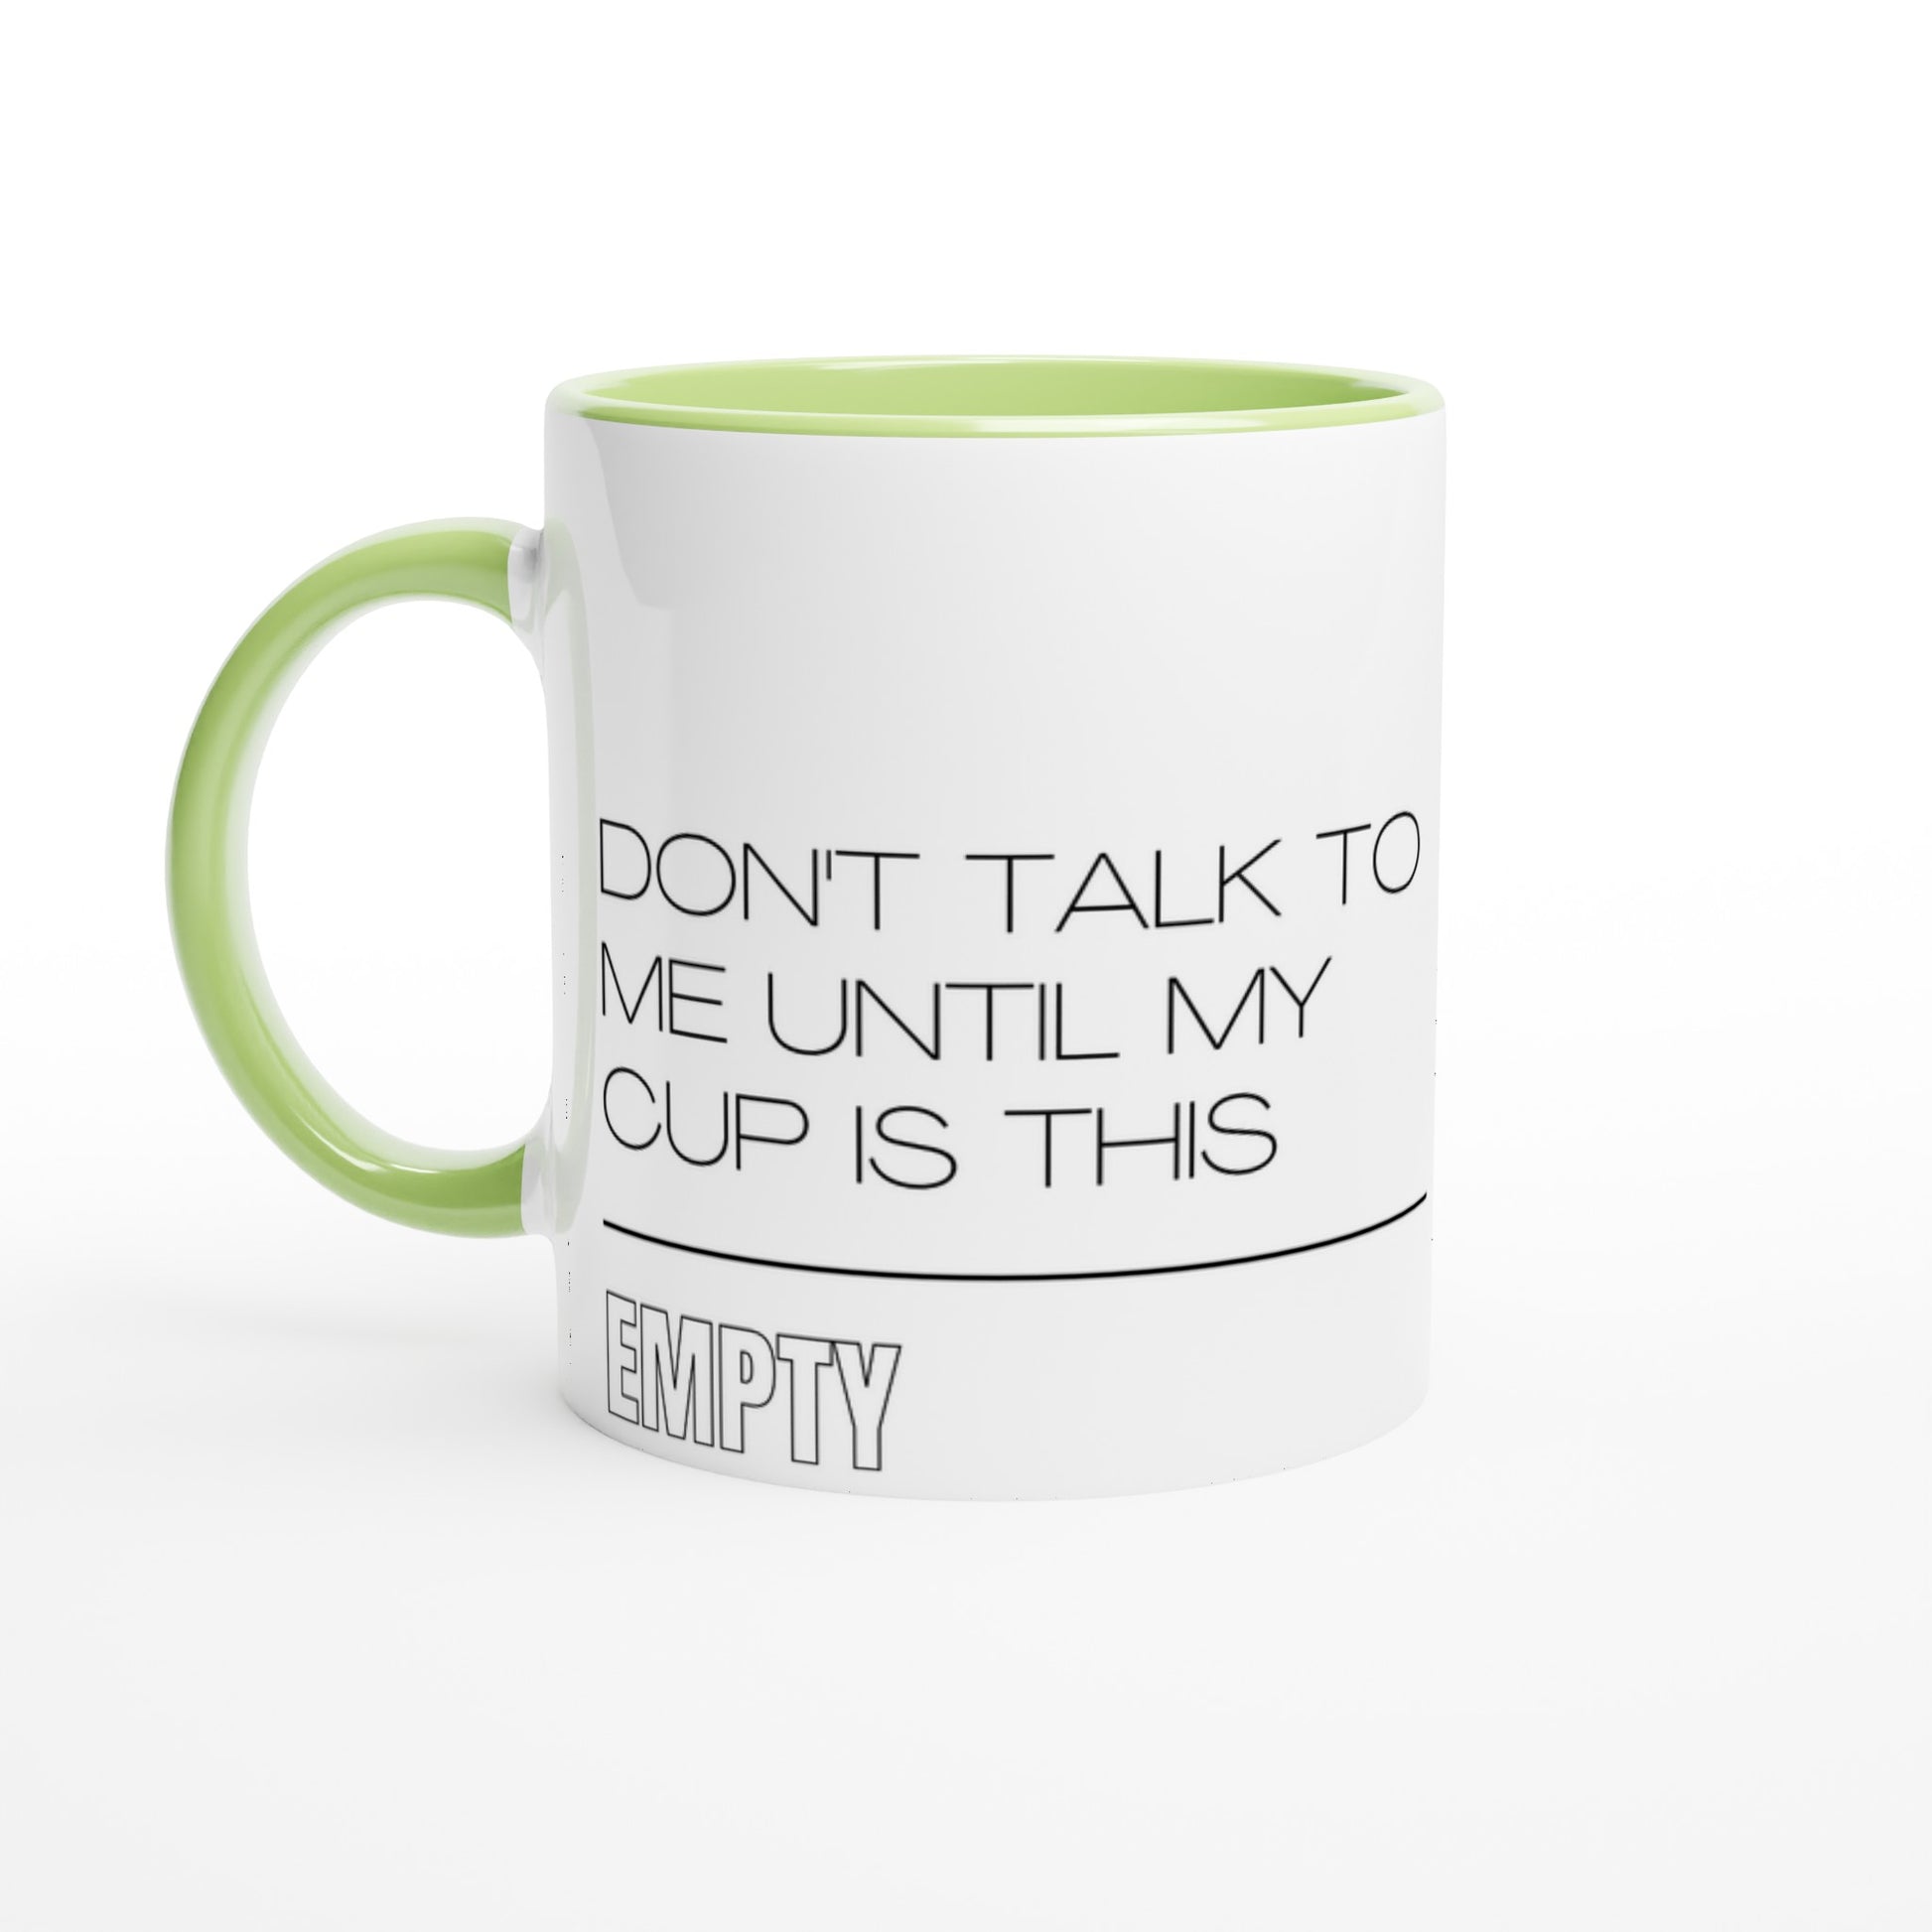 Don't Talk To Me Until My Cup Is This Empty - White 11oz Ceramic Mug with Colour Inside Ceramic Green Colour 11oz Mug Coffee Funny